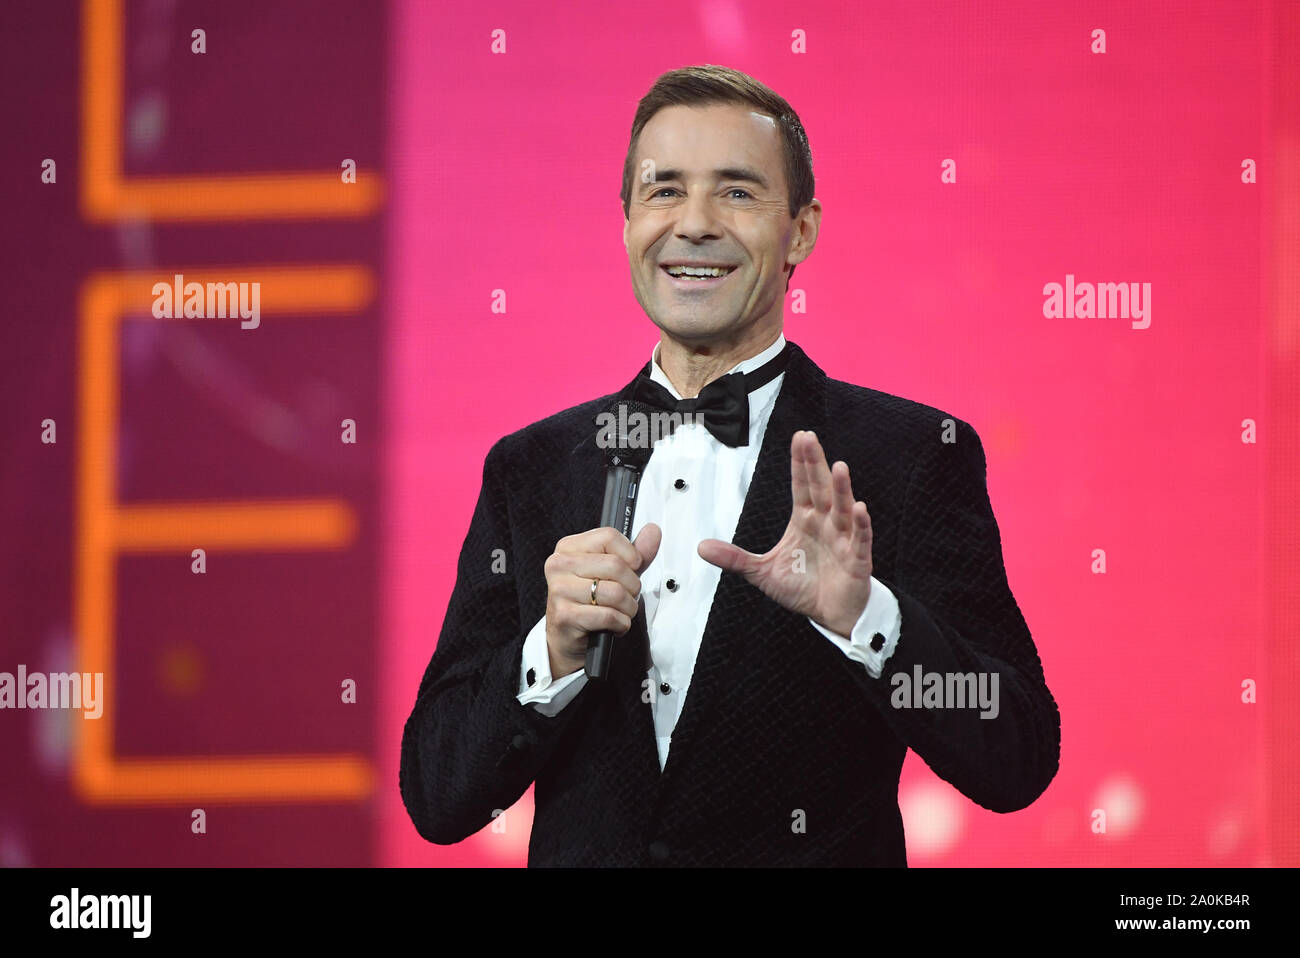 Leipzig, Germany. 20th Sep, 2019. Presenter Kai Pflaume speaks during the television gala 'Golden Hen'. A total of 53 nominees from show business, society and sport can hope for the award. The Golden Hen is dedicated to the GDR entertainer Hahnemann, who died in 1991. Credit: Hendrik Schmidt/dpa-Zentralbild/dpa/Alamy Live News Stock Photo